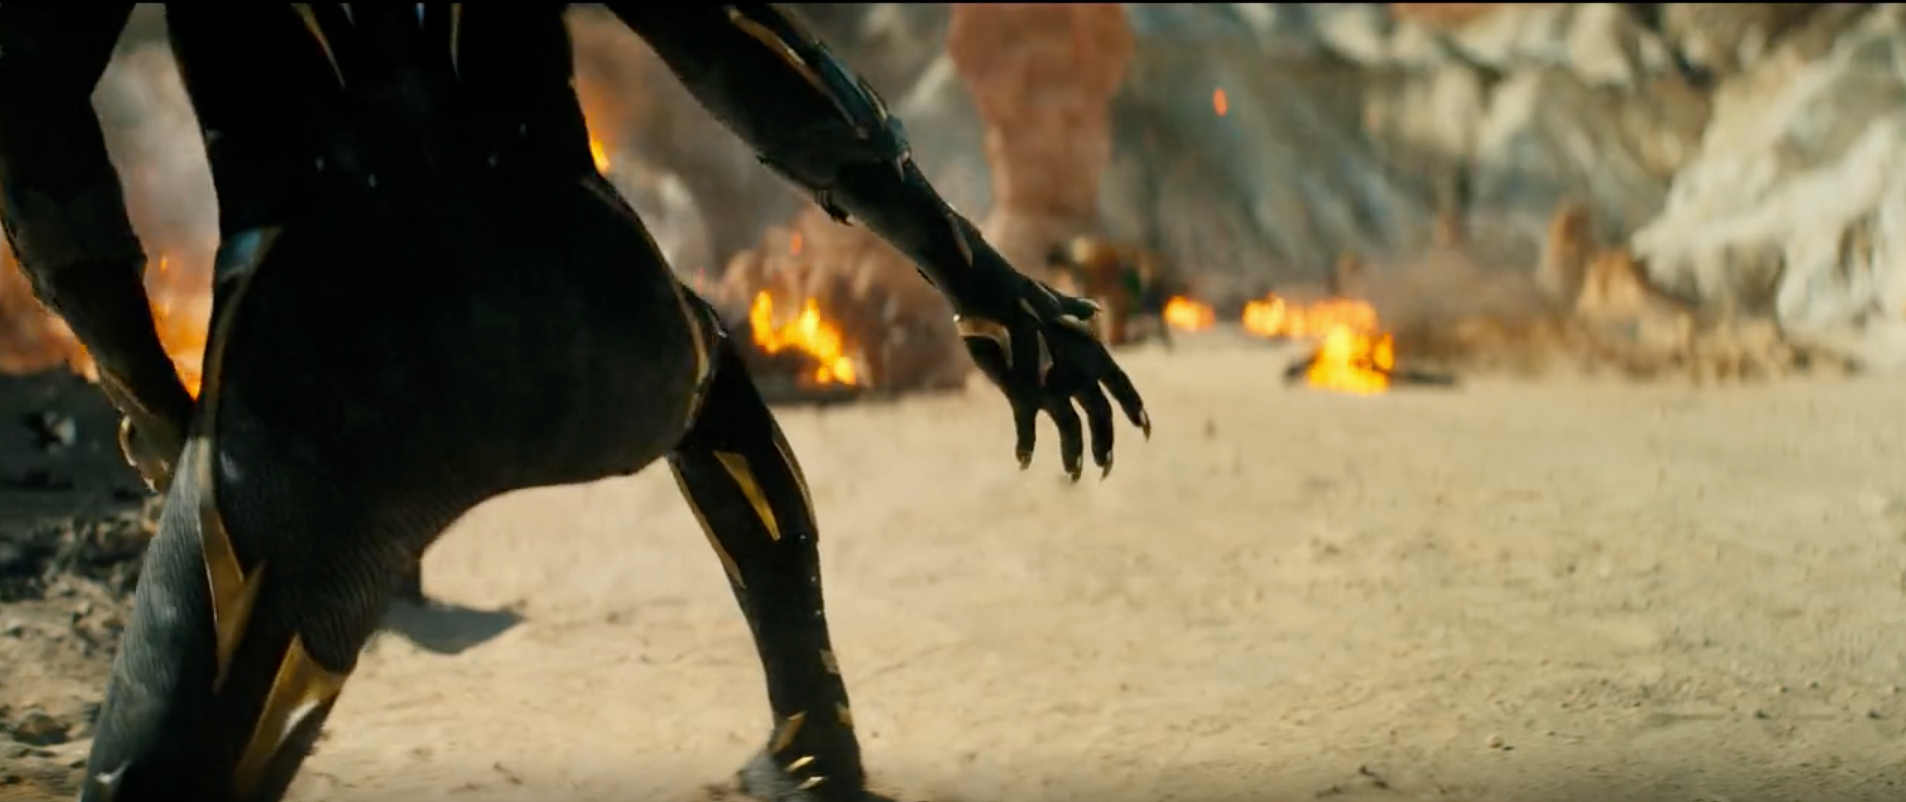 black-panther-2-trailer-who-is-new-black-panther-suit.png